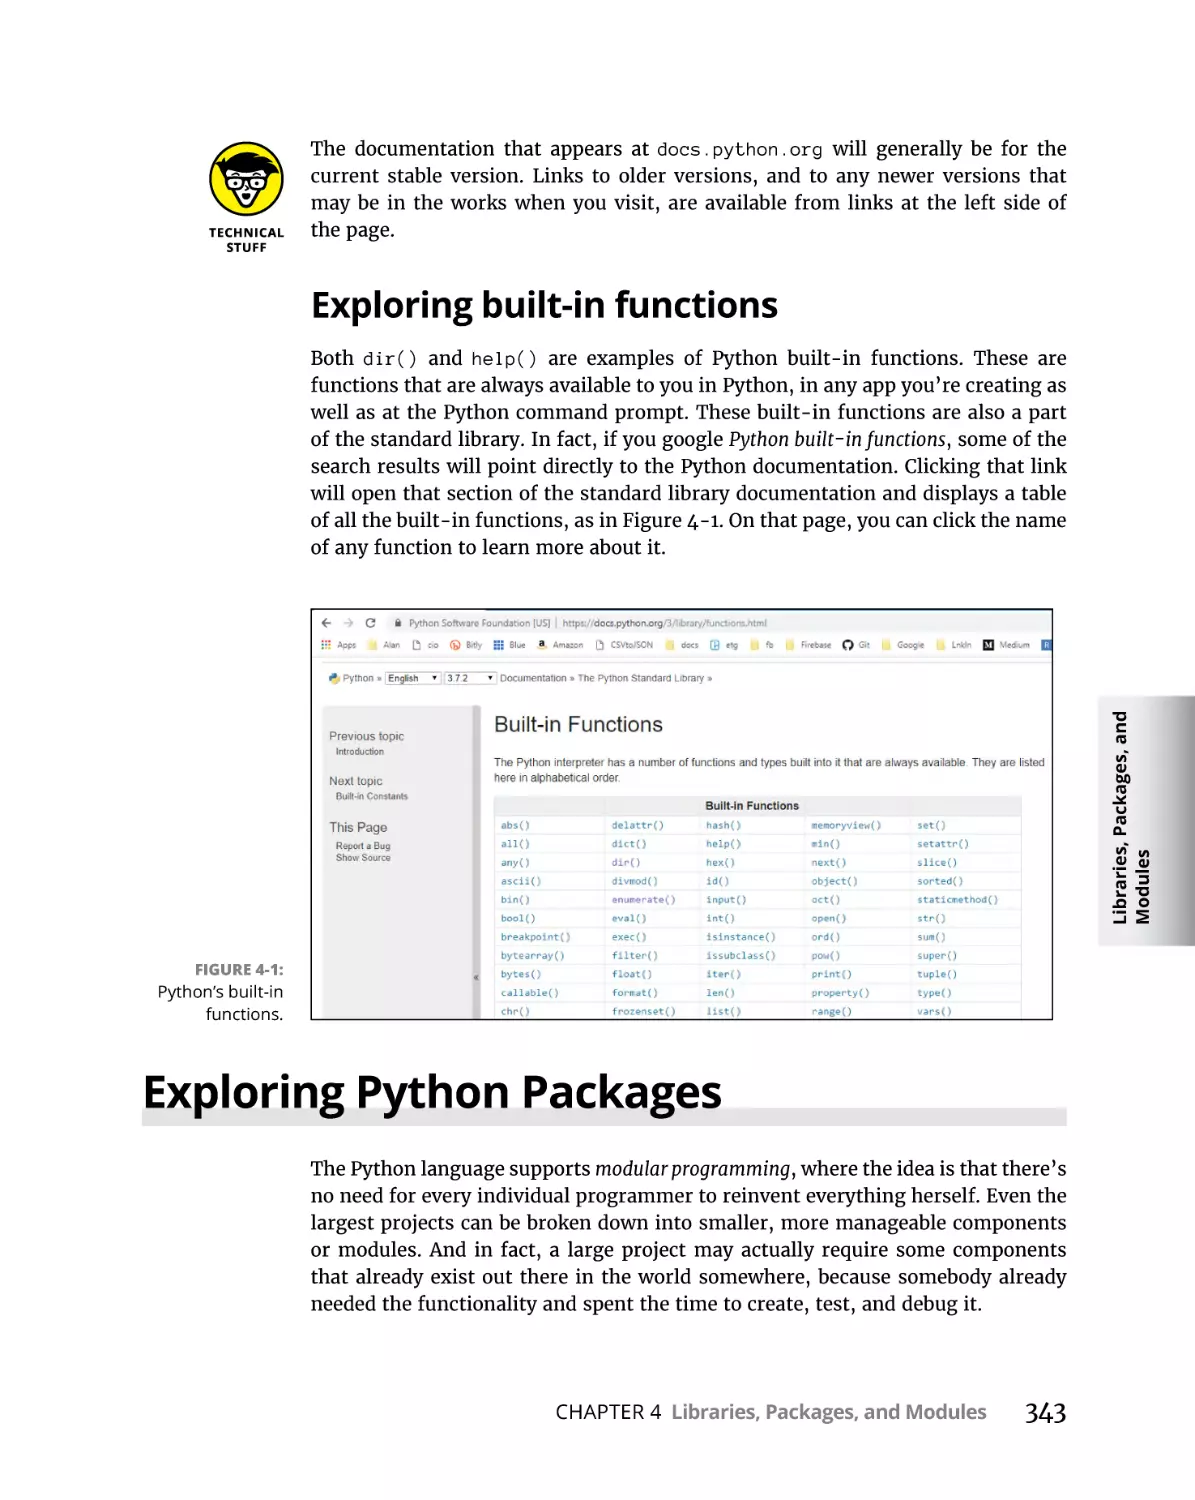 Exploring built-in functions
Exploring Python Packages